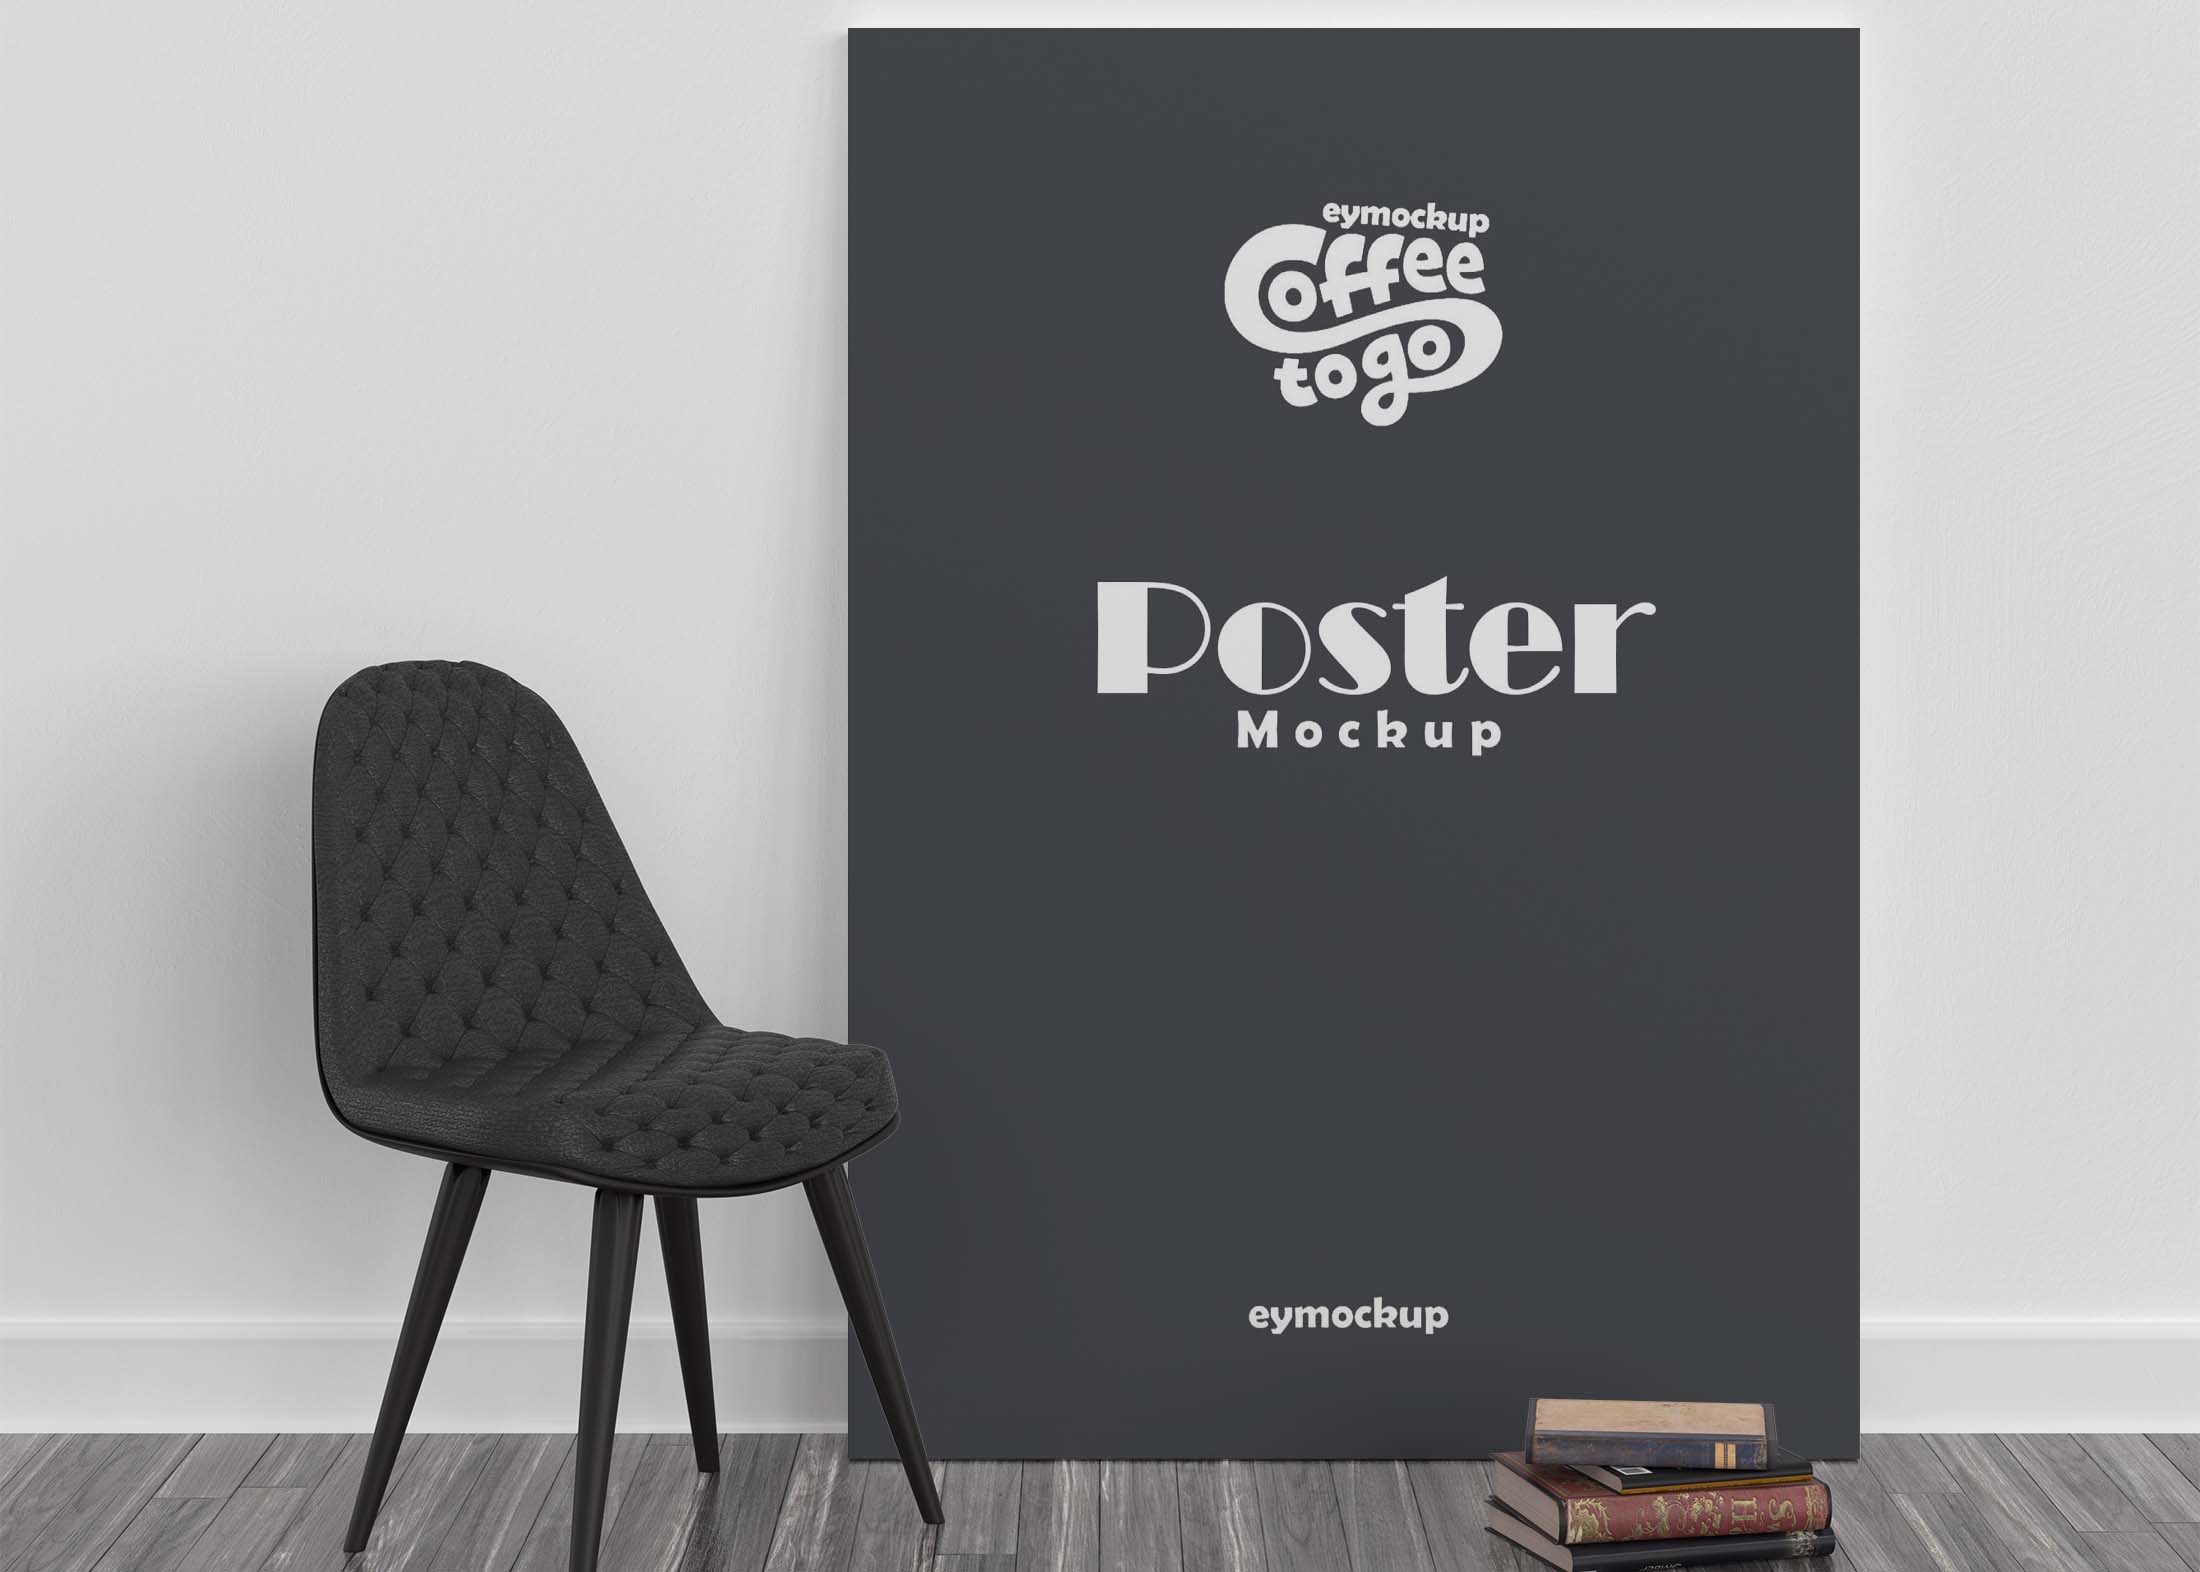 Free a4 Poster Mockup with Chair